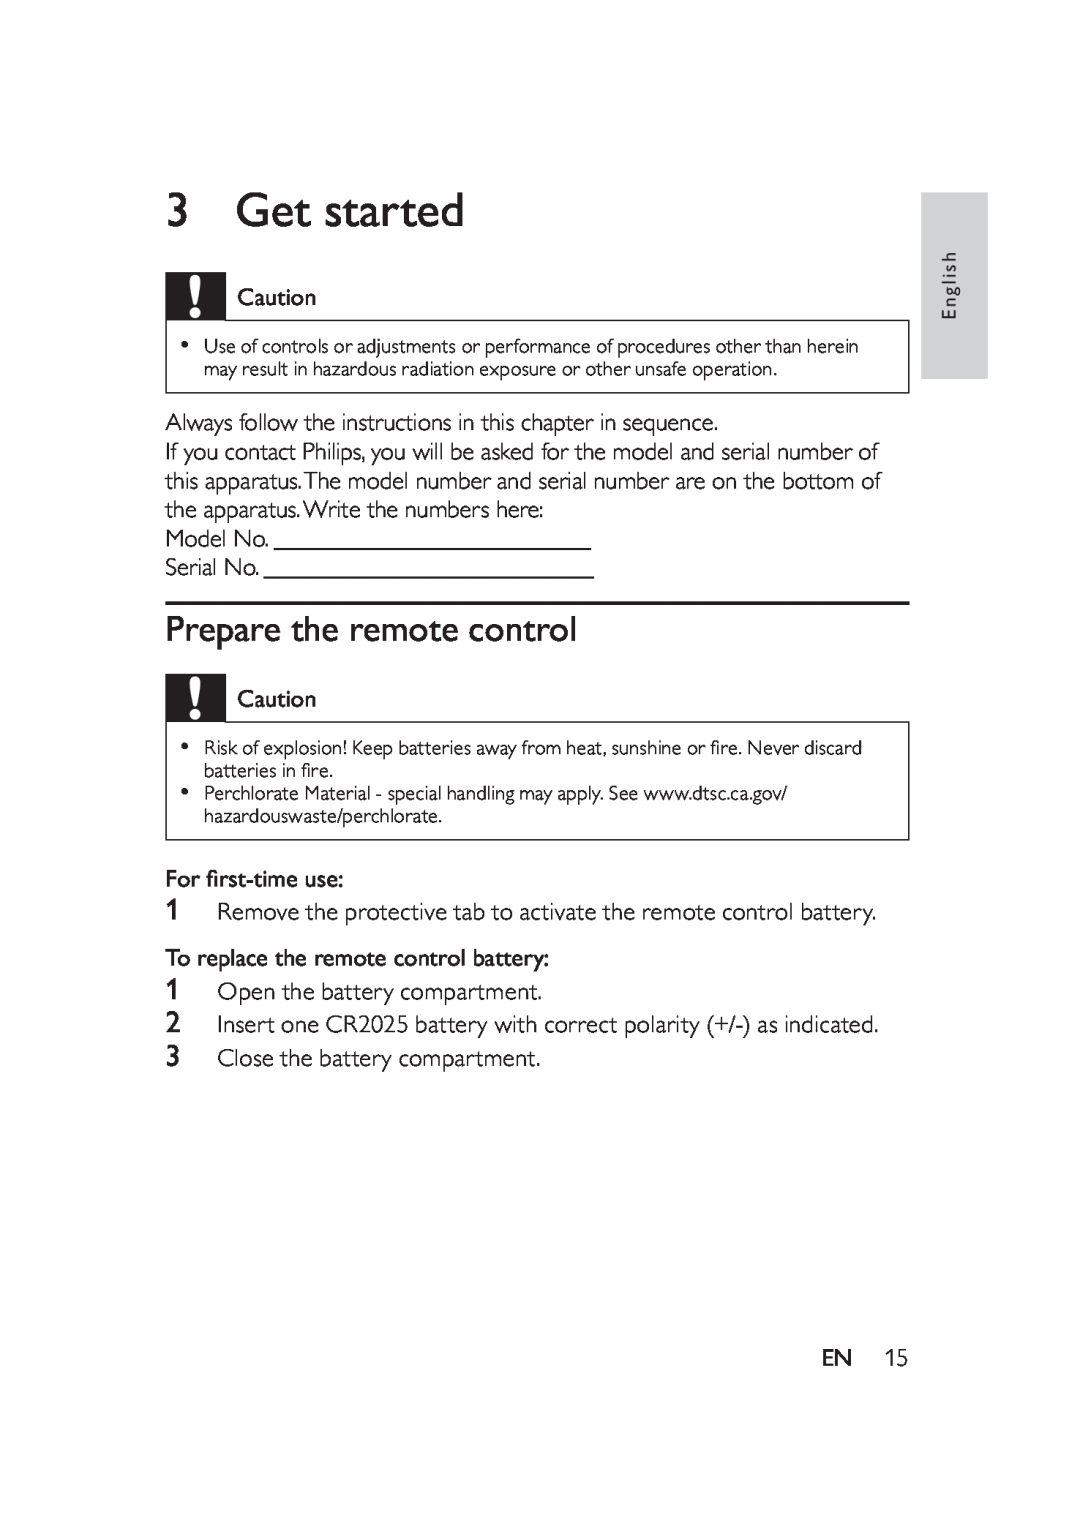 Philips DS8550 user manual Get started, Prepare the remote control 